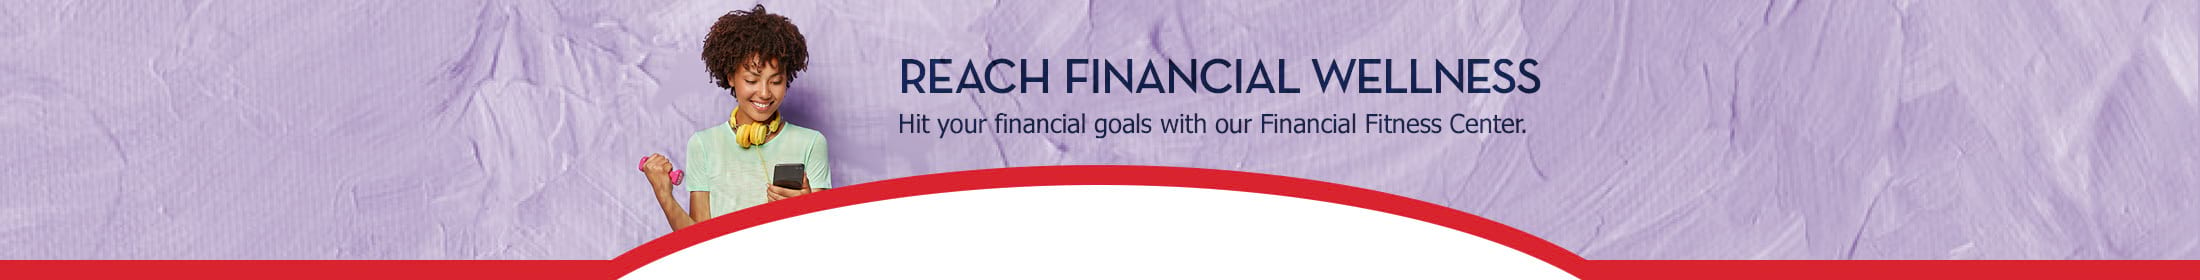 Financial Fitness Center | WELCOME